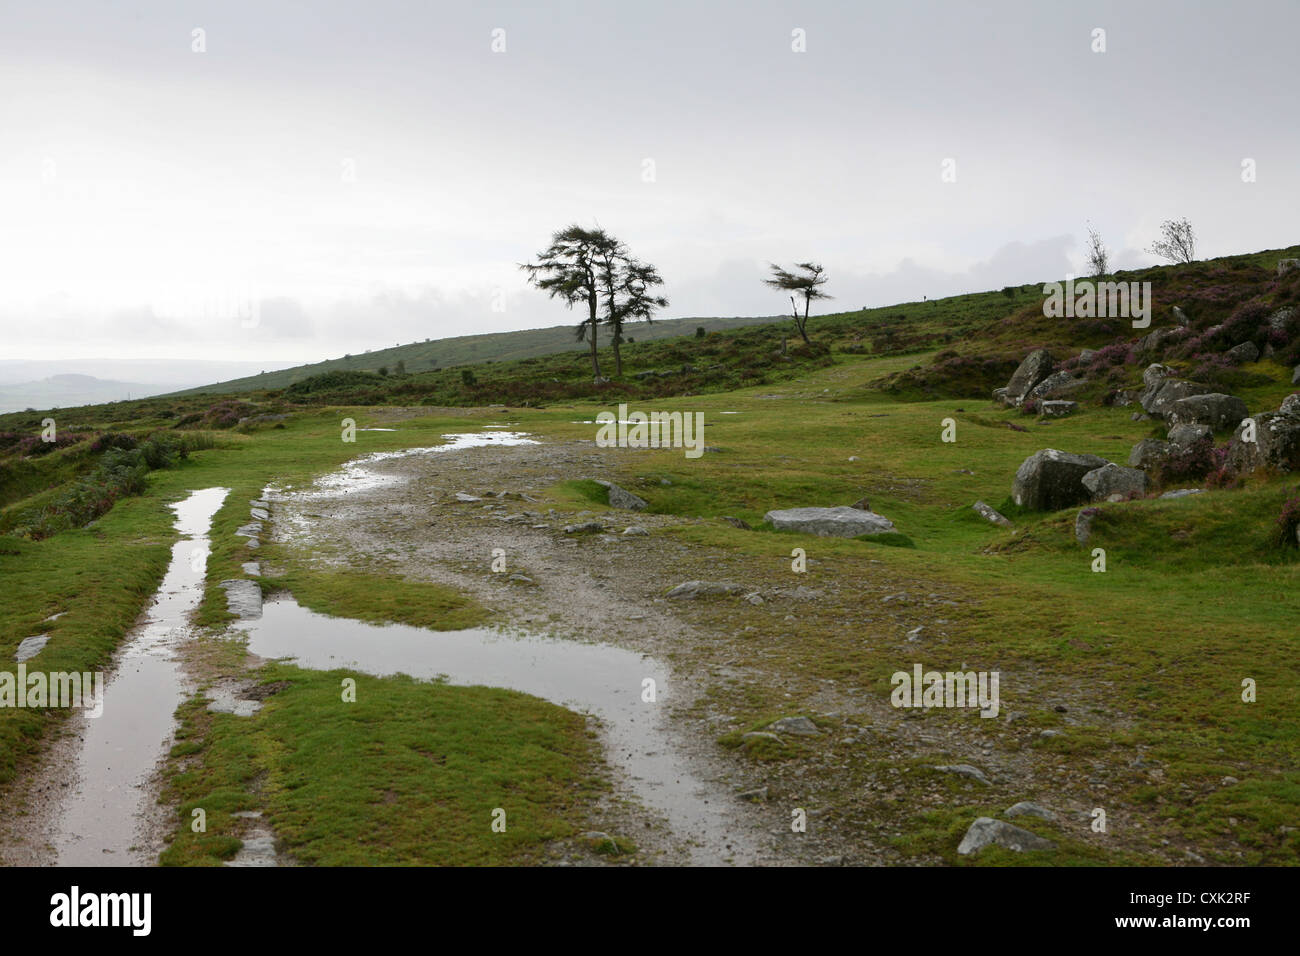 View of moorland near Haytor Rocks, with old tramway and quarried granite rocks, on a wet, grey day, Dartmoor National Park, UK Stock Photo